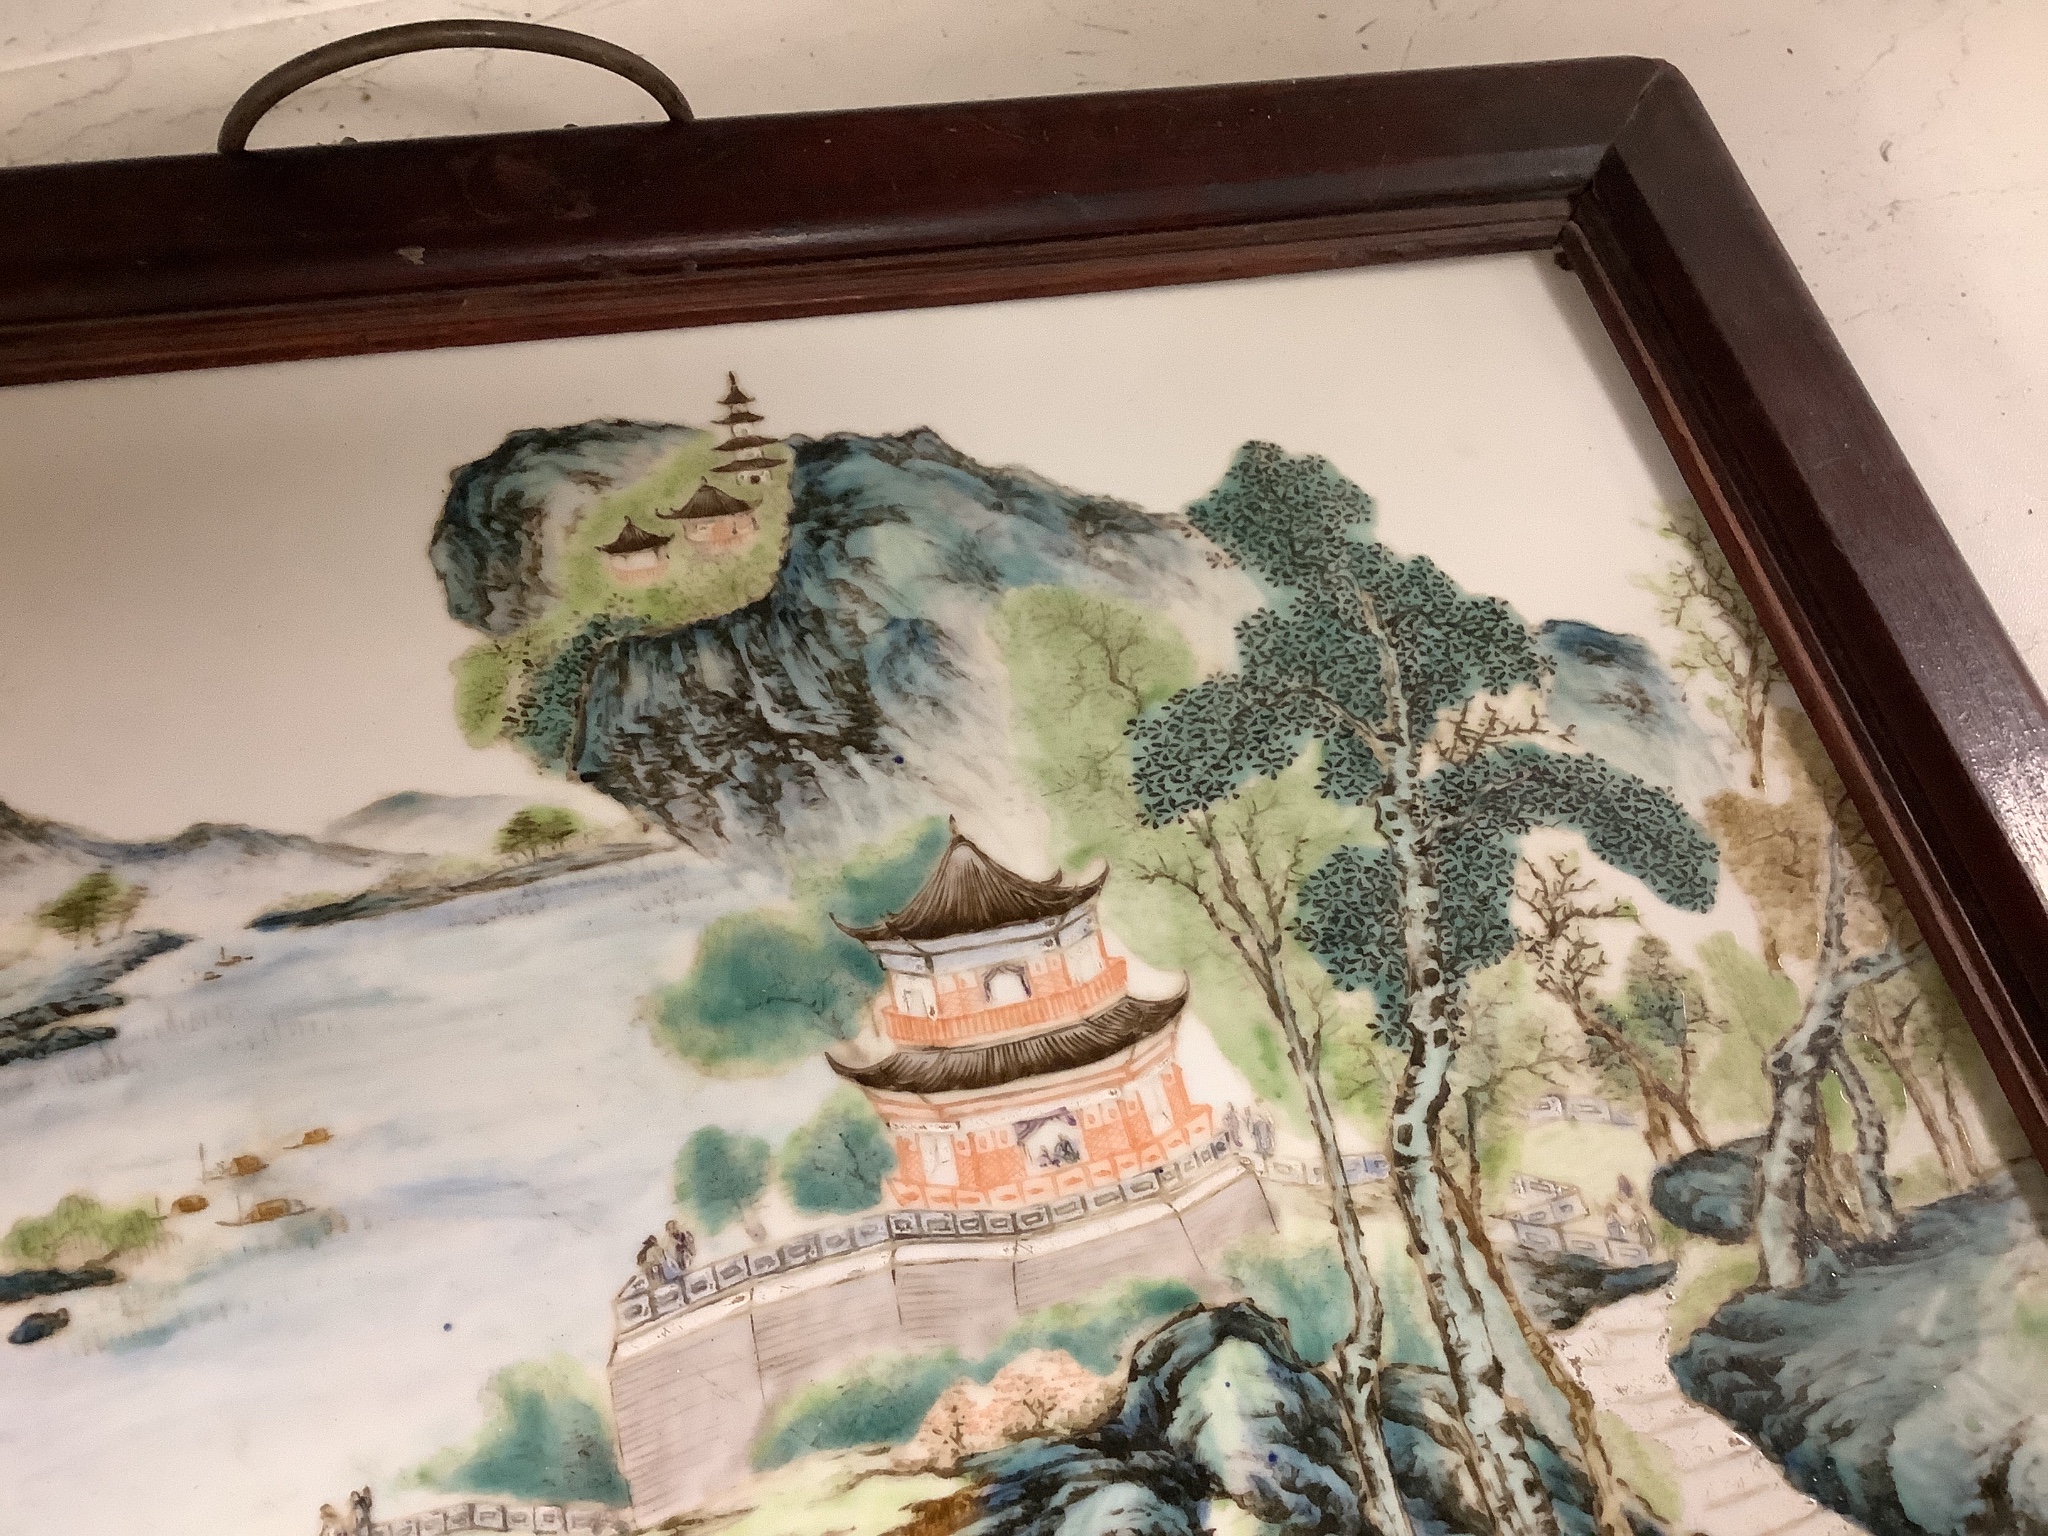 A Chinese enamelled porcelain plaque, in hardwood frame, 27 x 41cm excl. frame